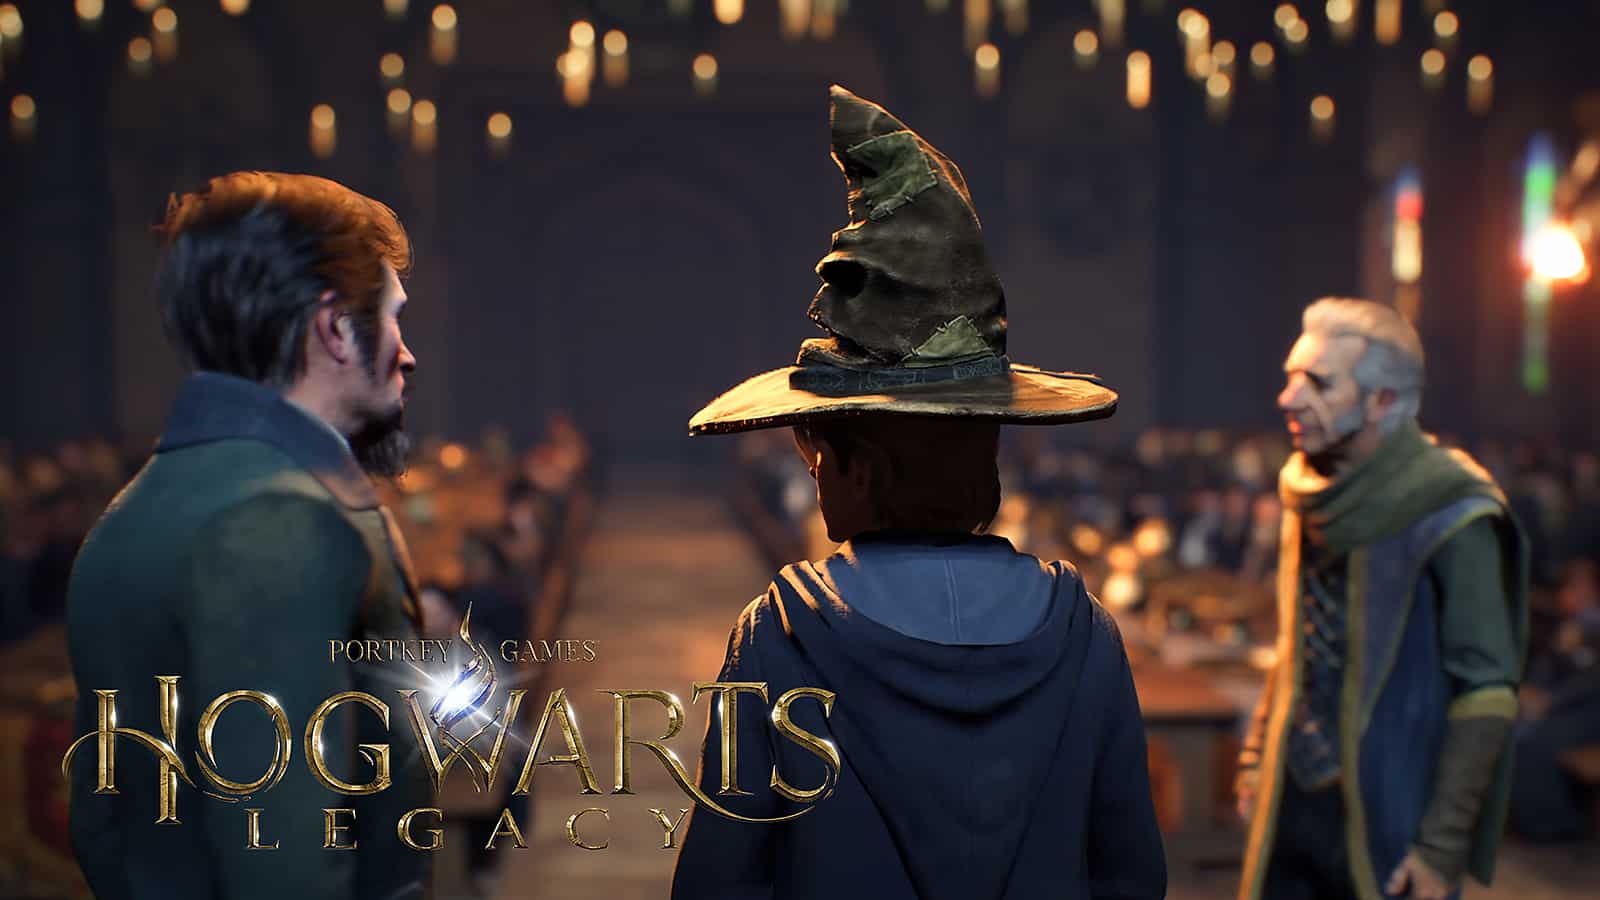 Hogwarts Legacy Release could be Delayed, according to Leaks